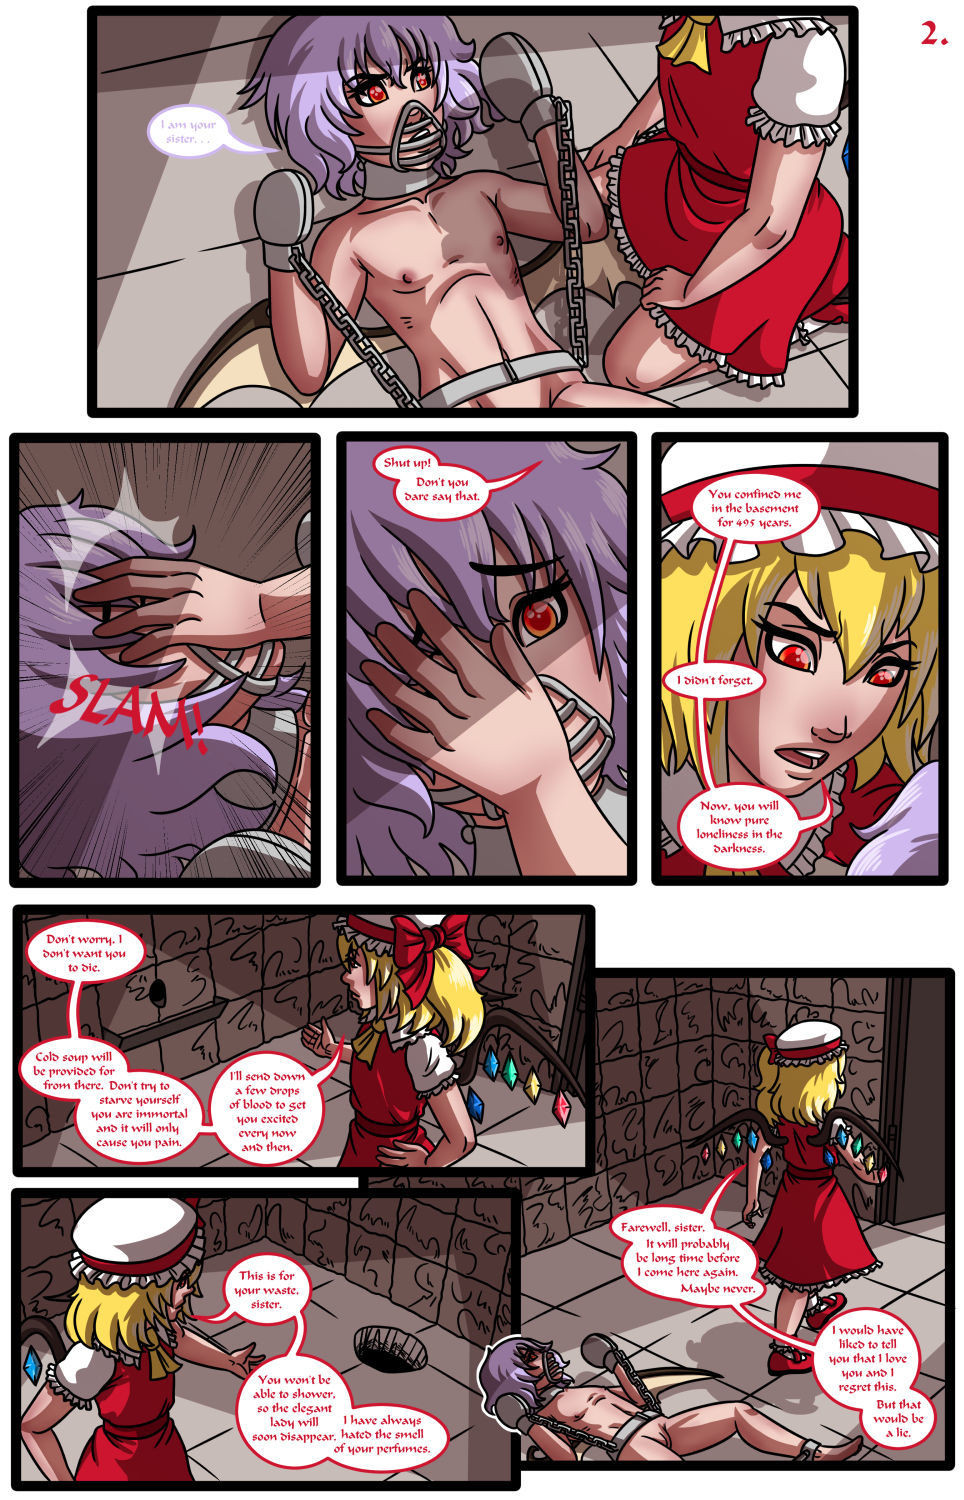 Overthrone - JZerosk page 2